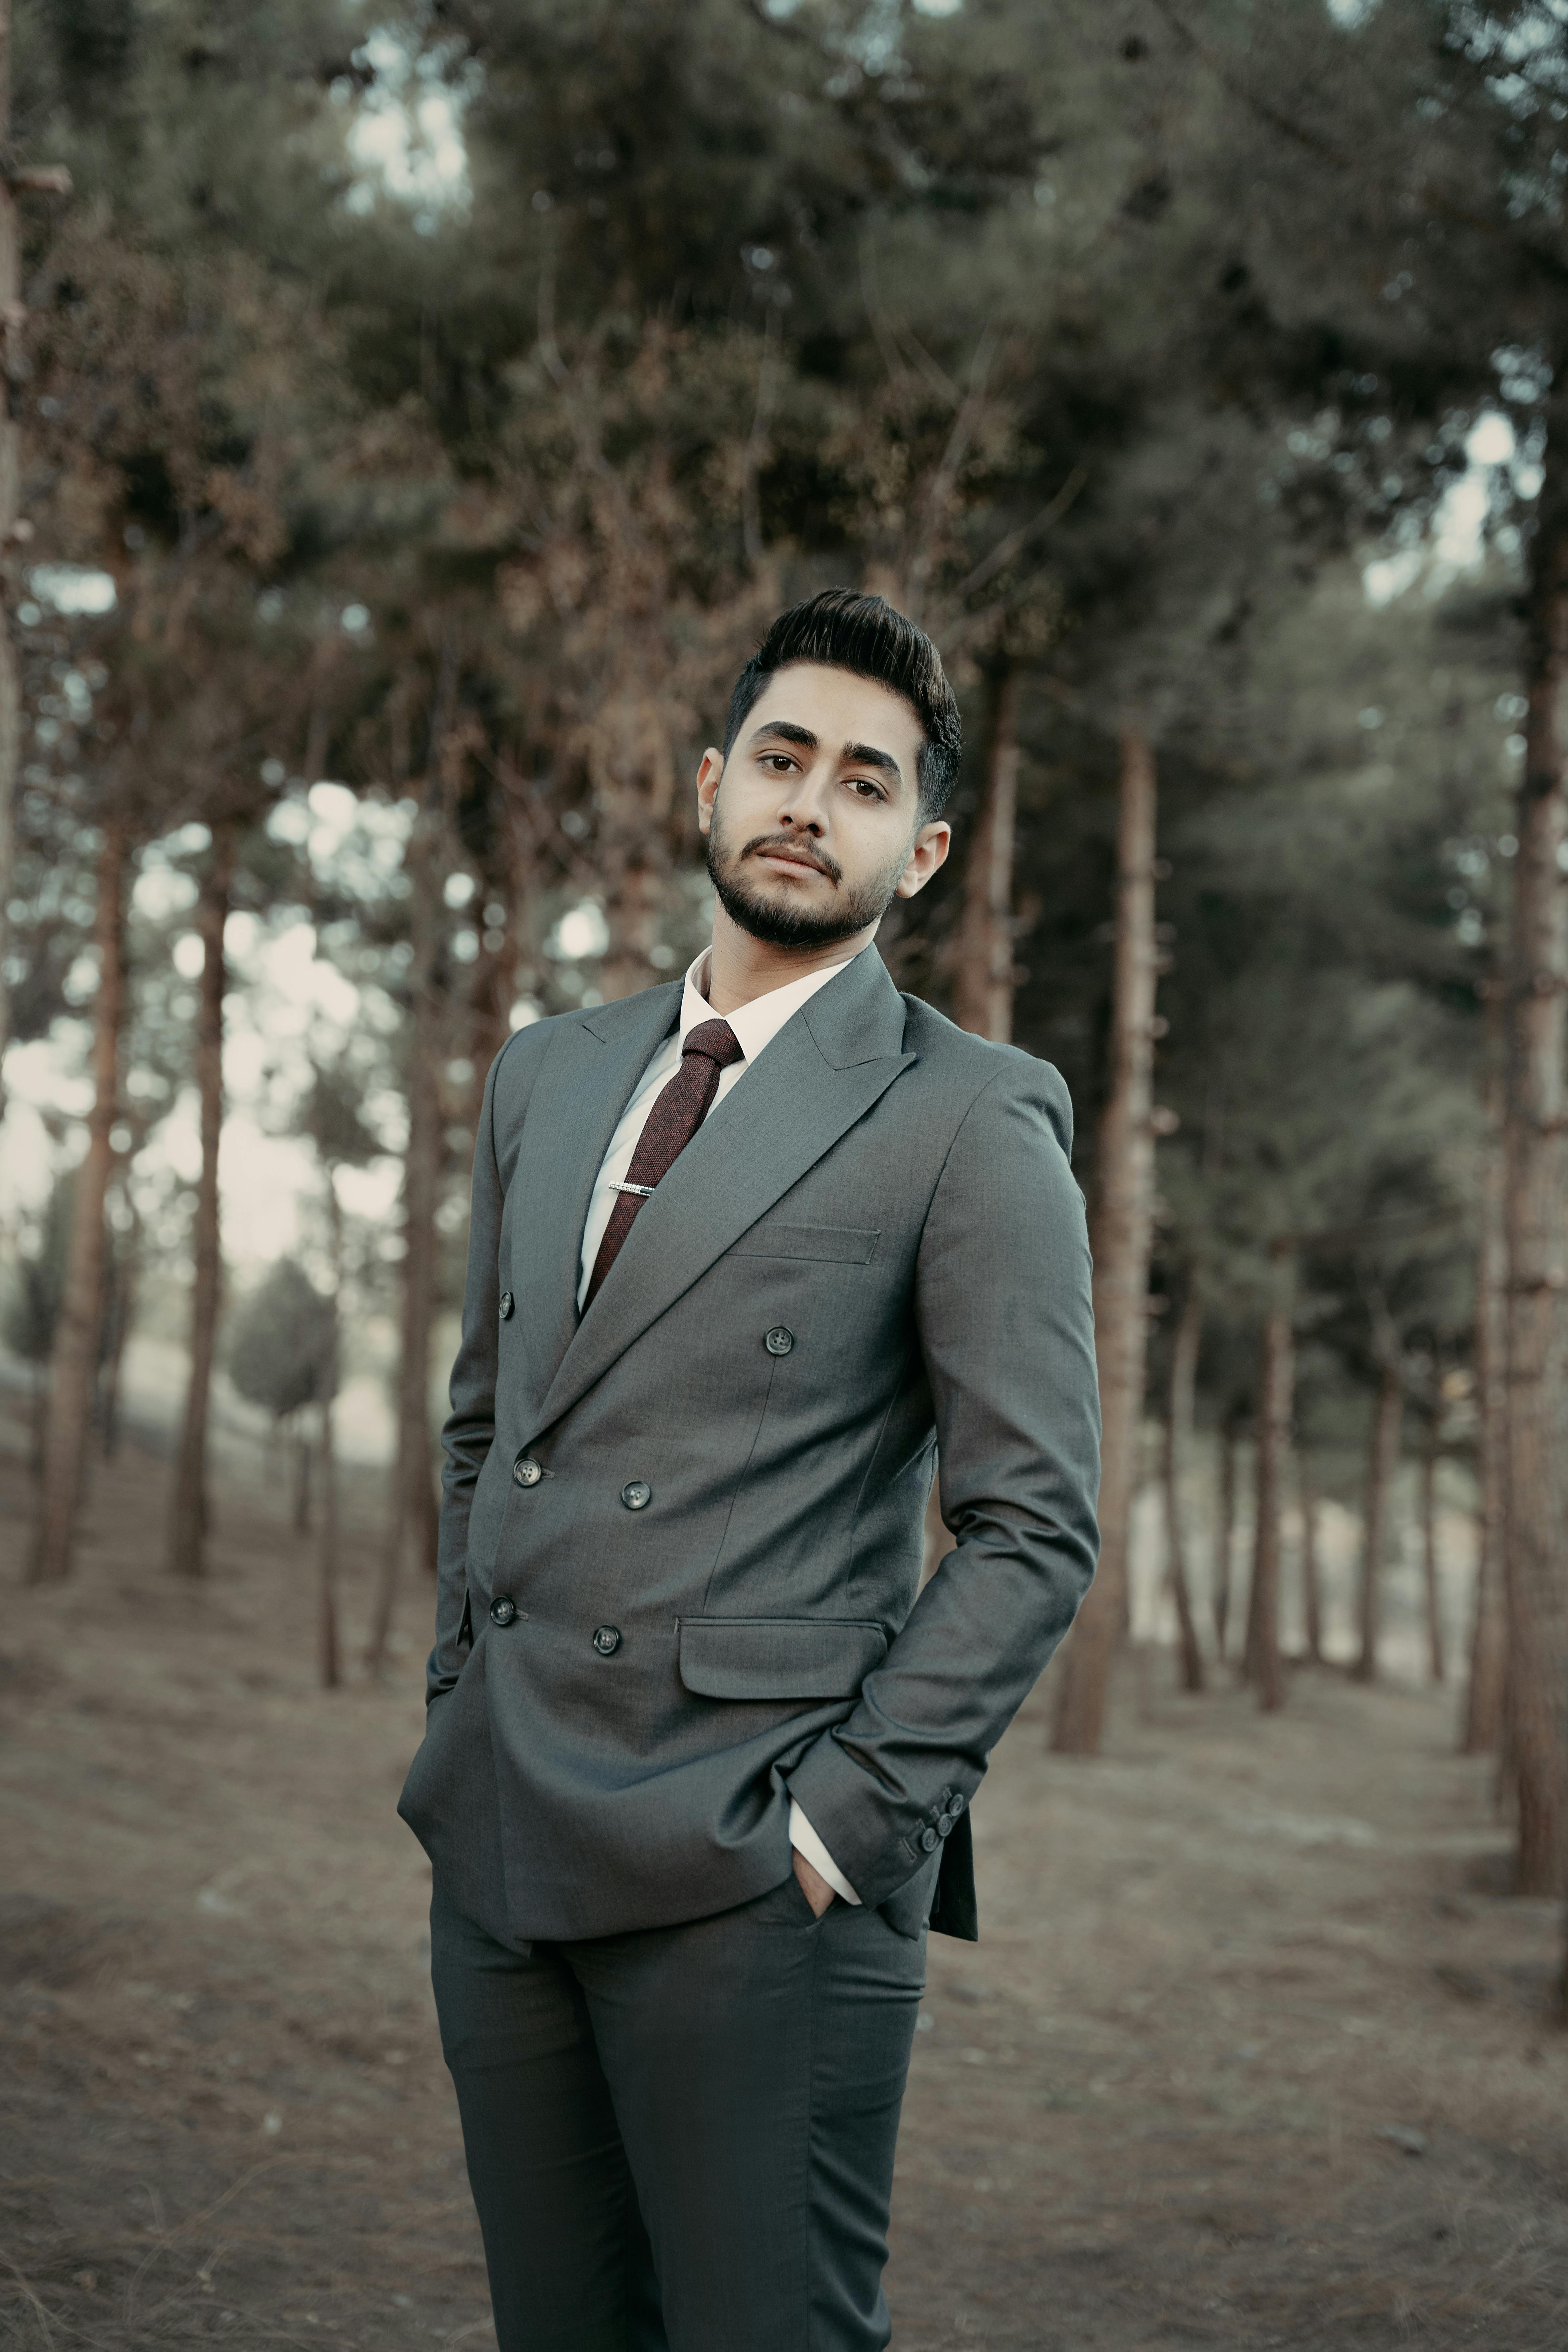 Stylish Man in Suit and Sunglasses Posing in Park · Free Stock Photo